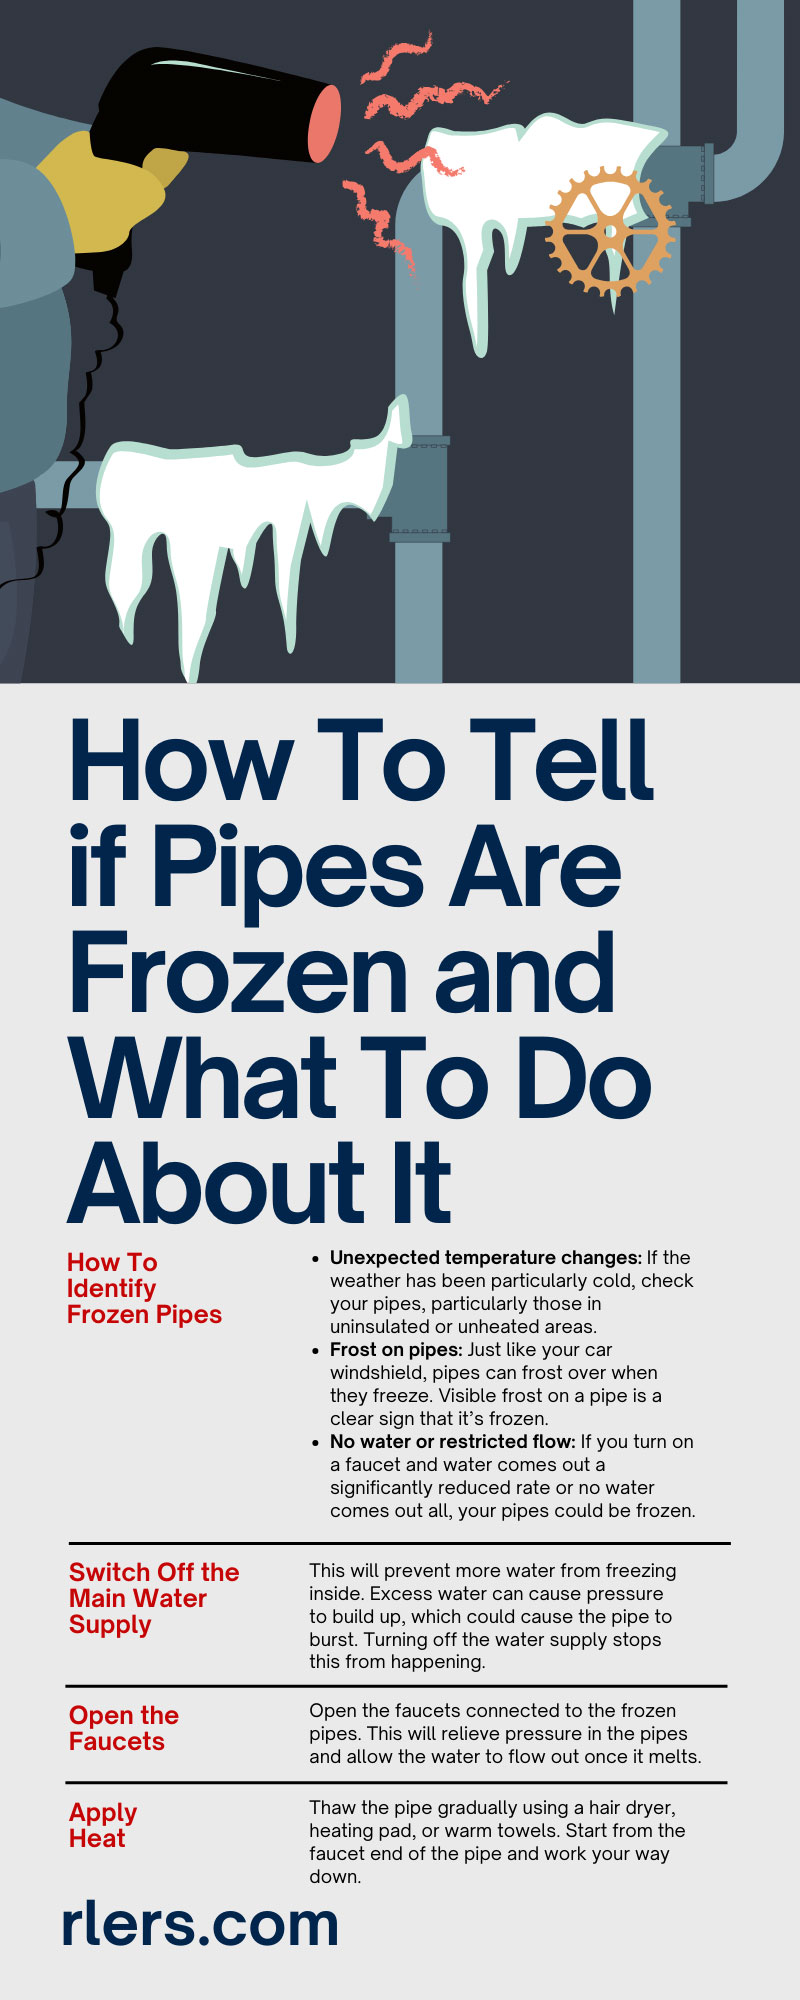 How To Tell if Pipes Are Frozen and What To Do About It